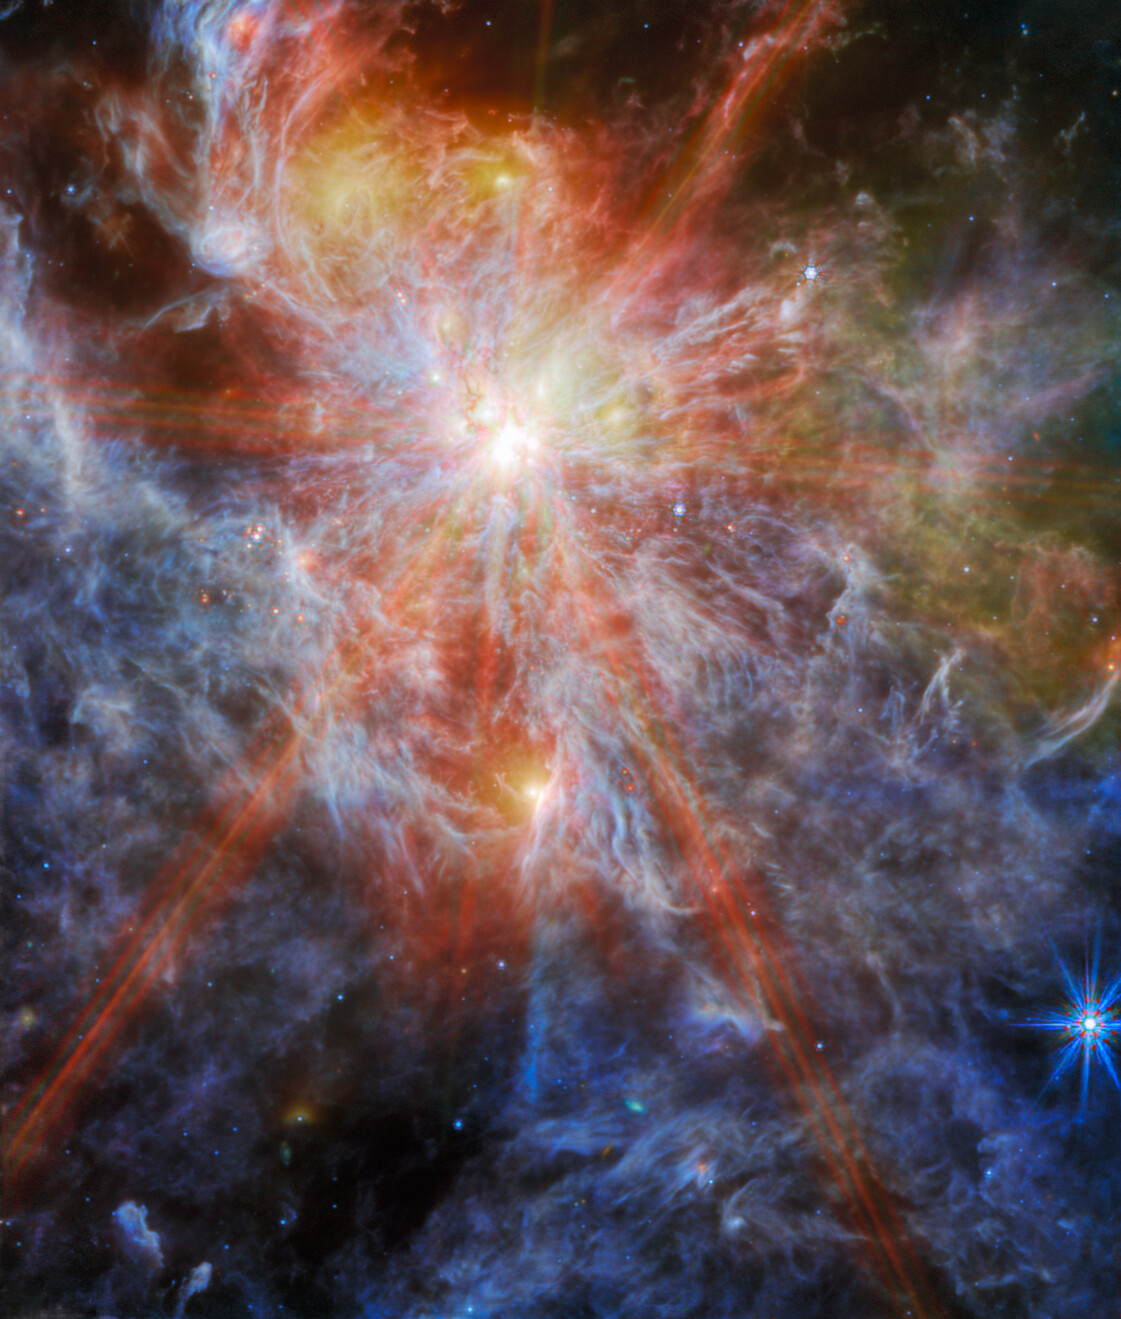 A bright young star, located in the upper left quadrant, shines through layers of wispy white and blue clouds on a dark background. The star is surrounded by thick orange spikes in an eight-pointed pattern, overlaid across the majority of the frame. A patch of greenish-yellow clouds appears in the top right area of the image. There are a couple other bright spots seen as glowing yellow dots among the clouds, as well as another bright star with smaller blue diffraction spikes in the bottom right corner.